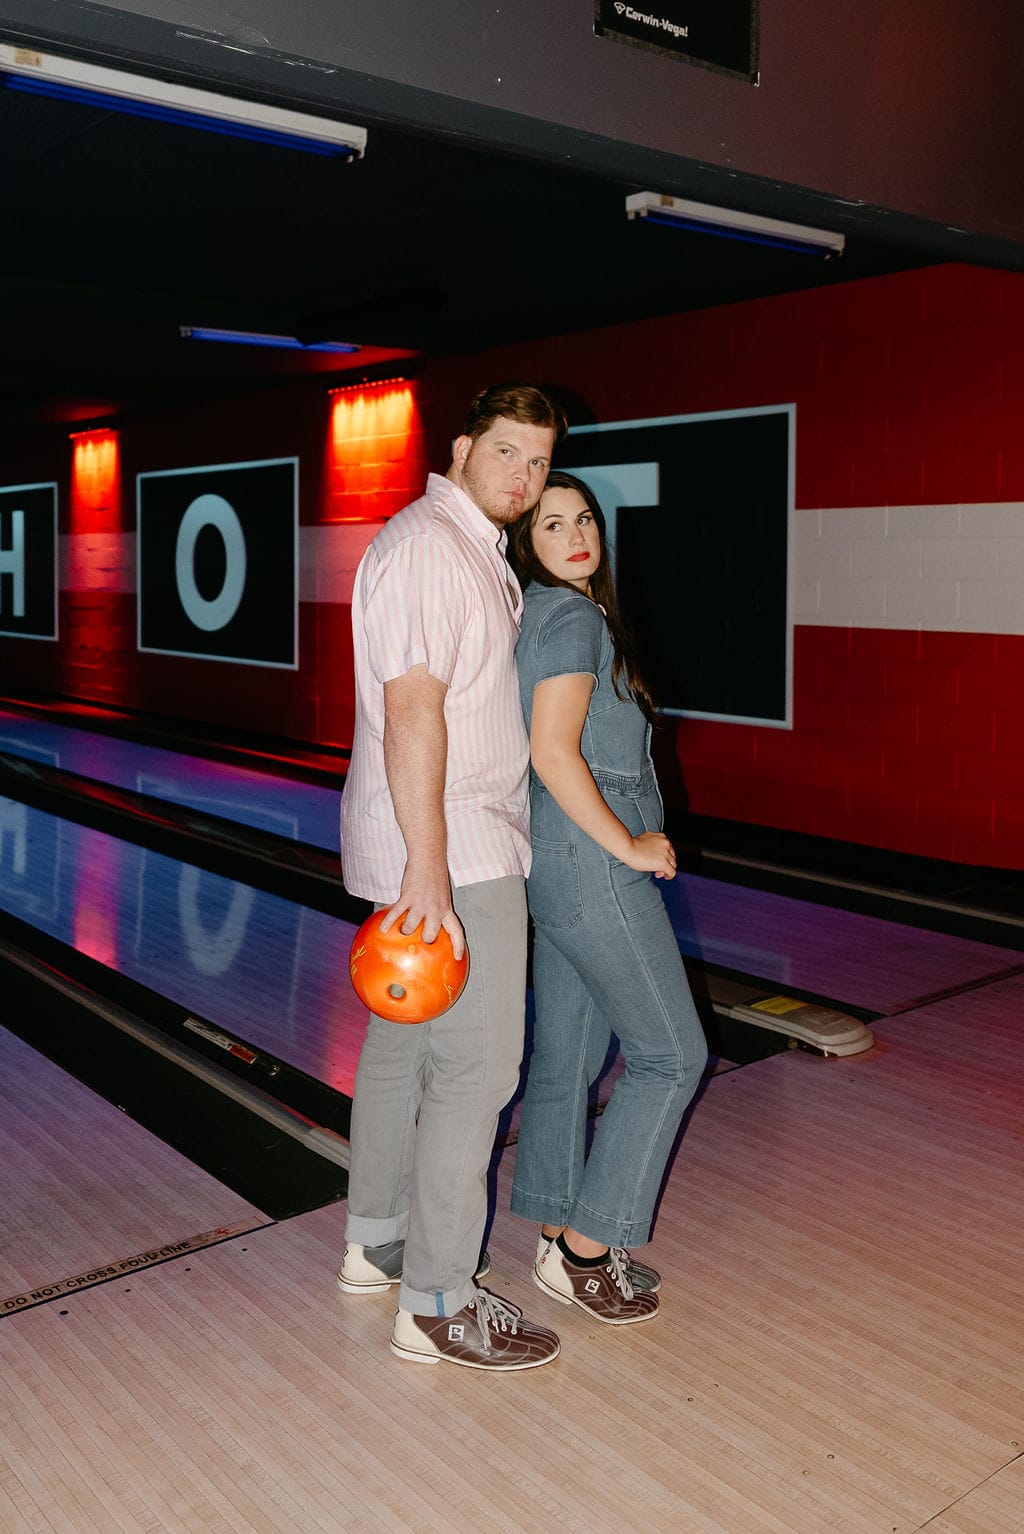 Bowling Engagement Session in Denver Colorado